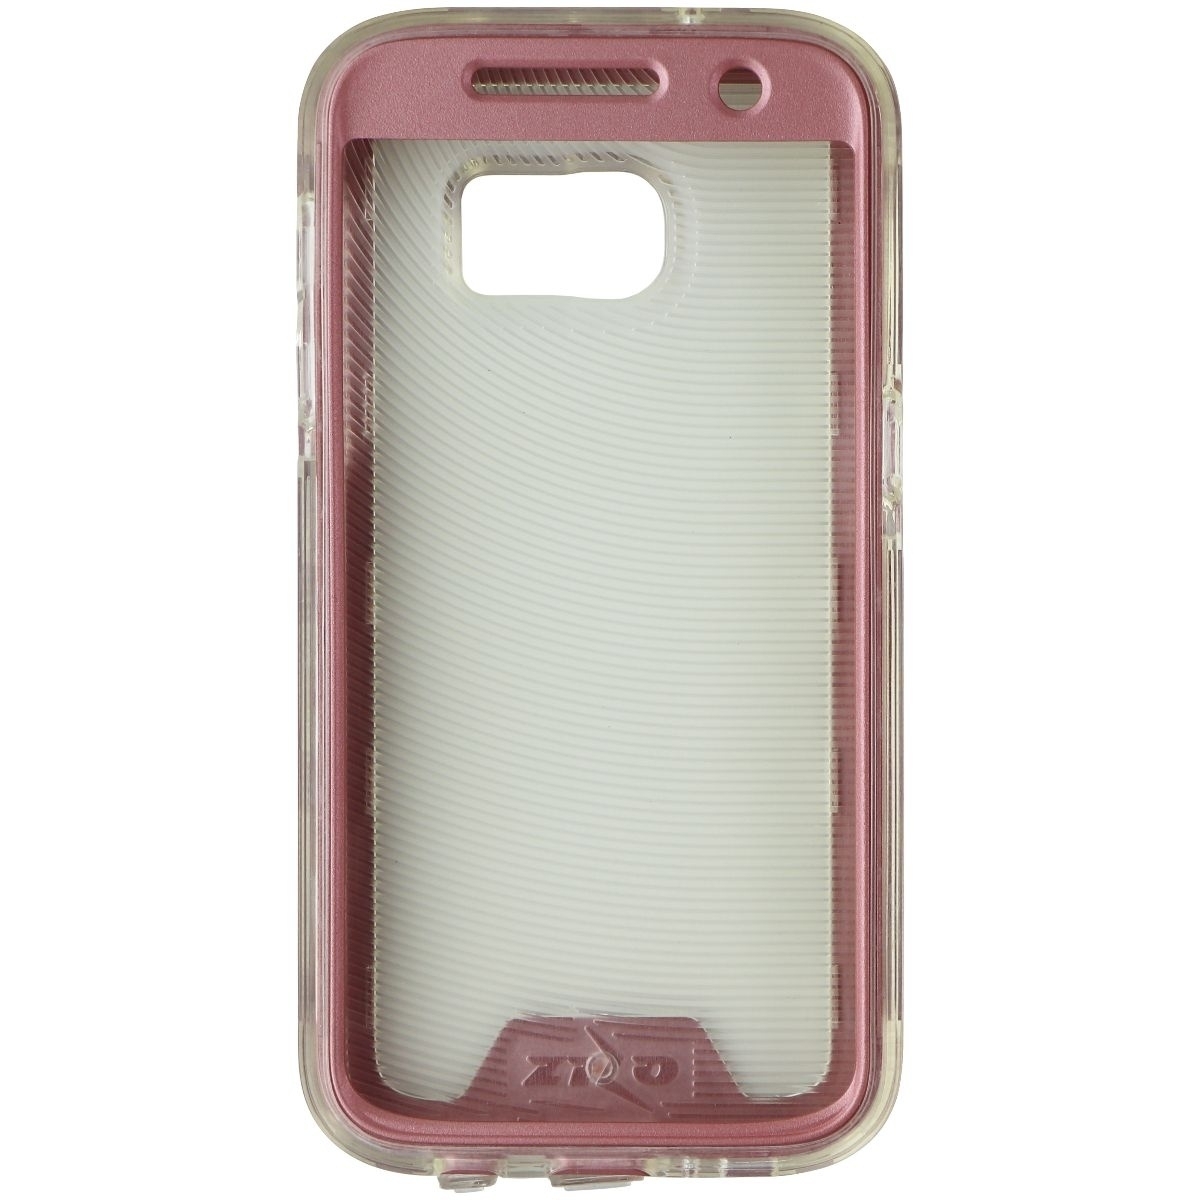 Zizo Ion Series Case For Samsung Galaxy S7 - Rose Gold / Clear